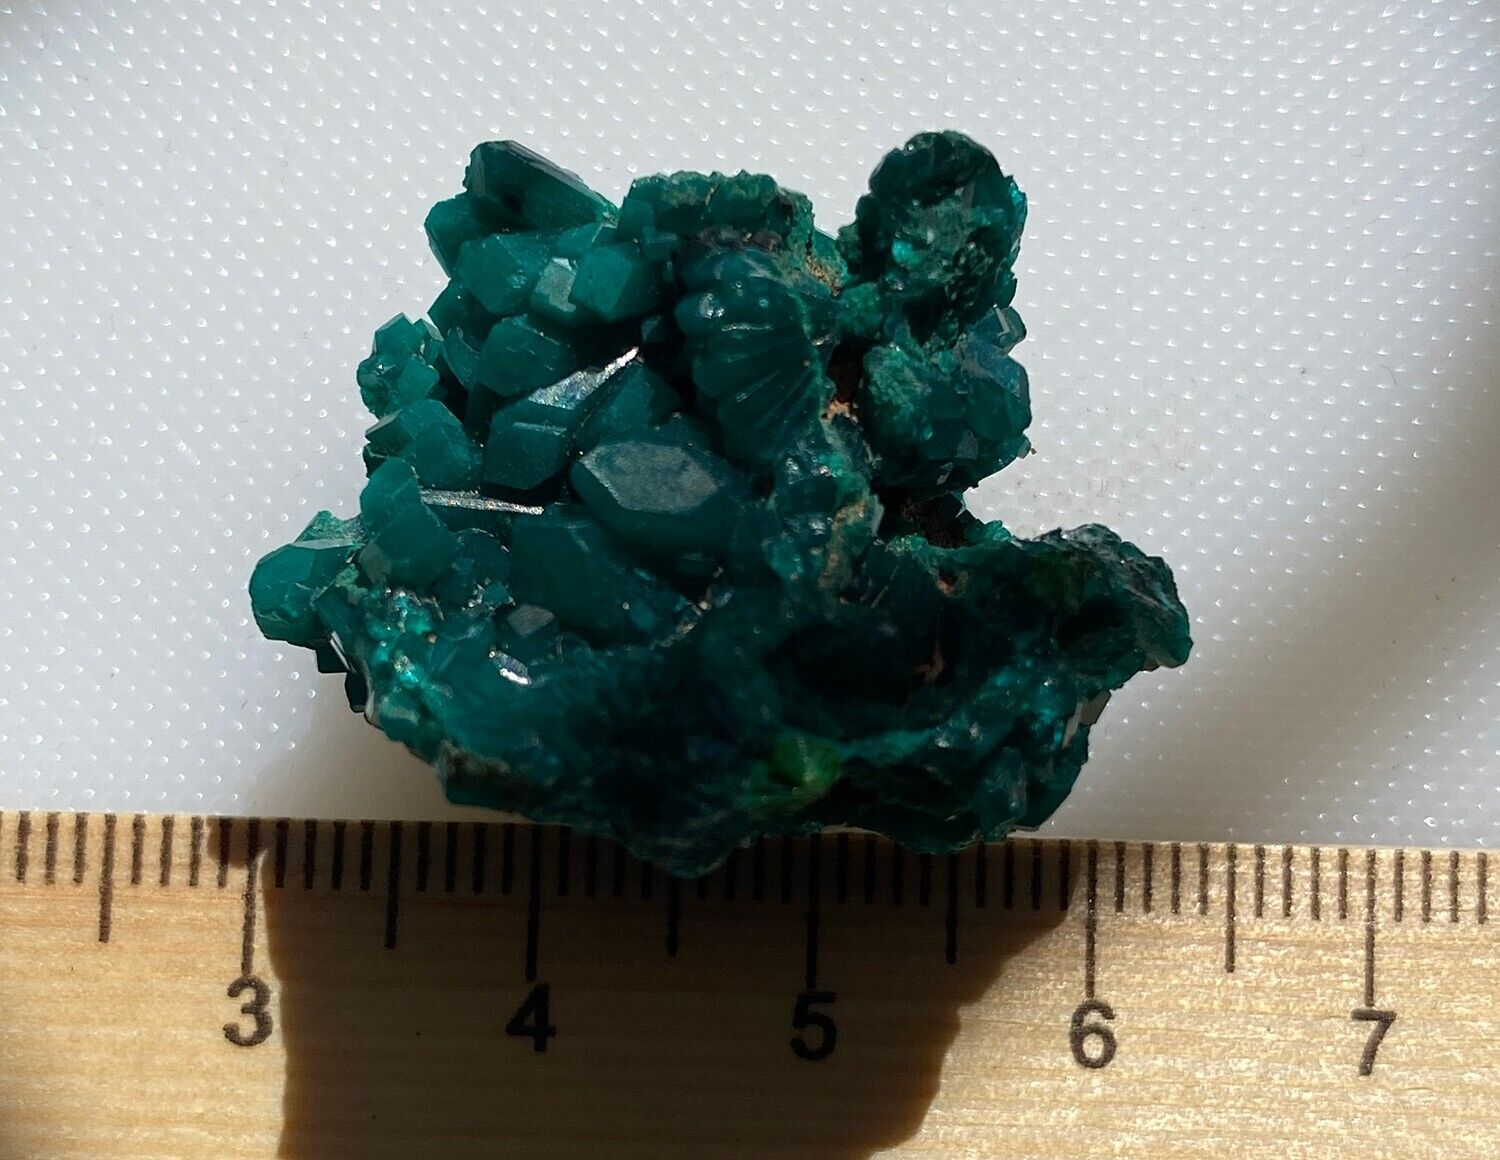 Amazing emerald green diopside cluster from Congo - Weight 14.60g, 73.53ct